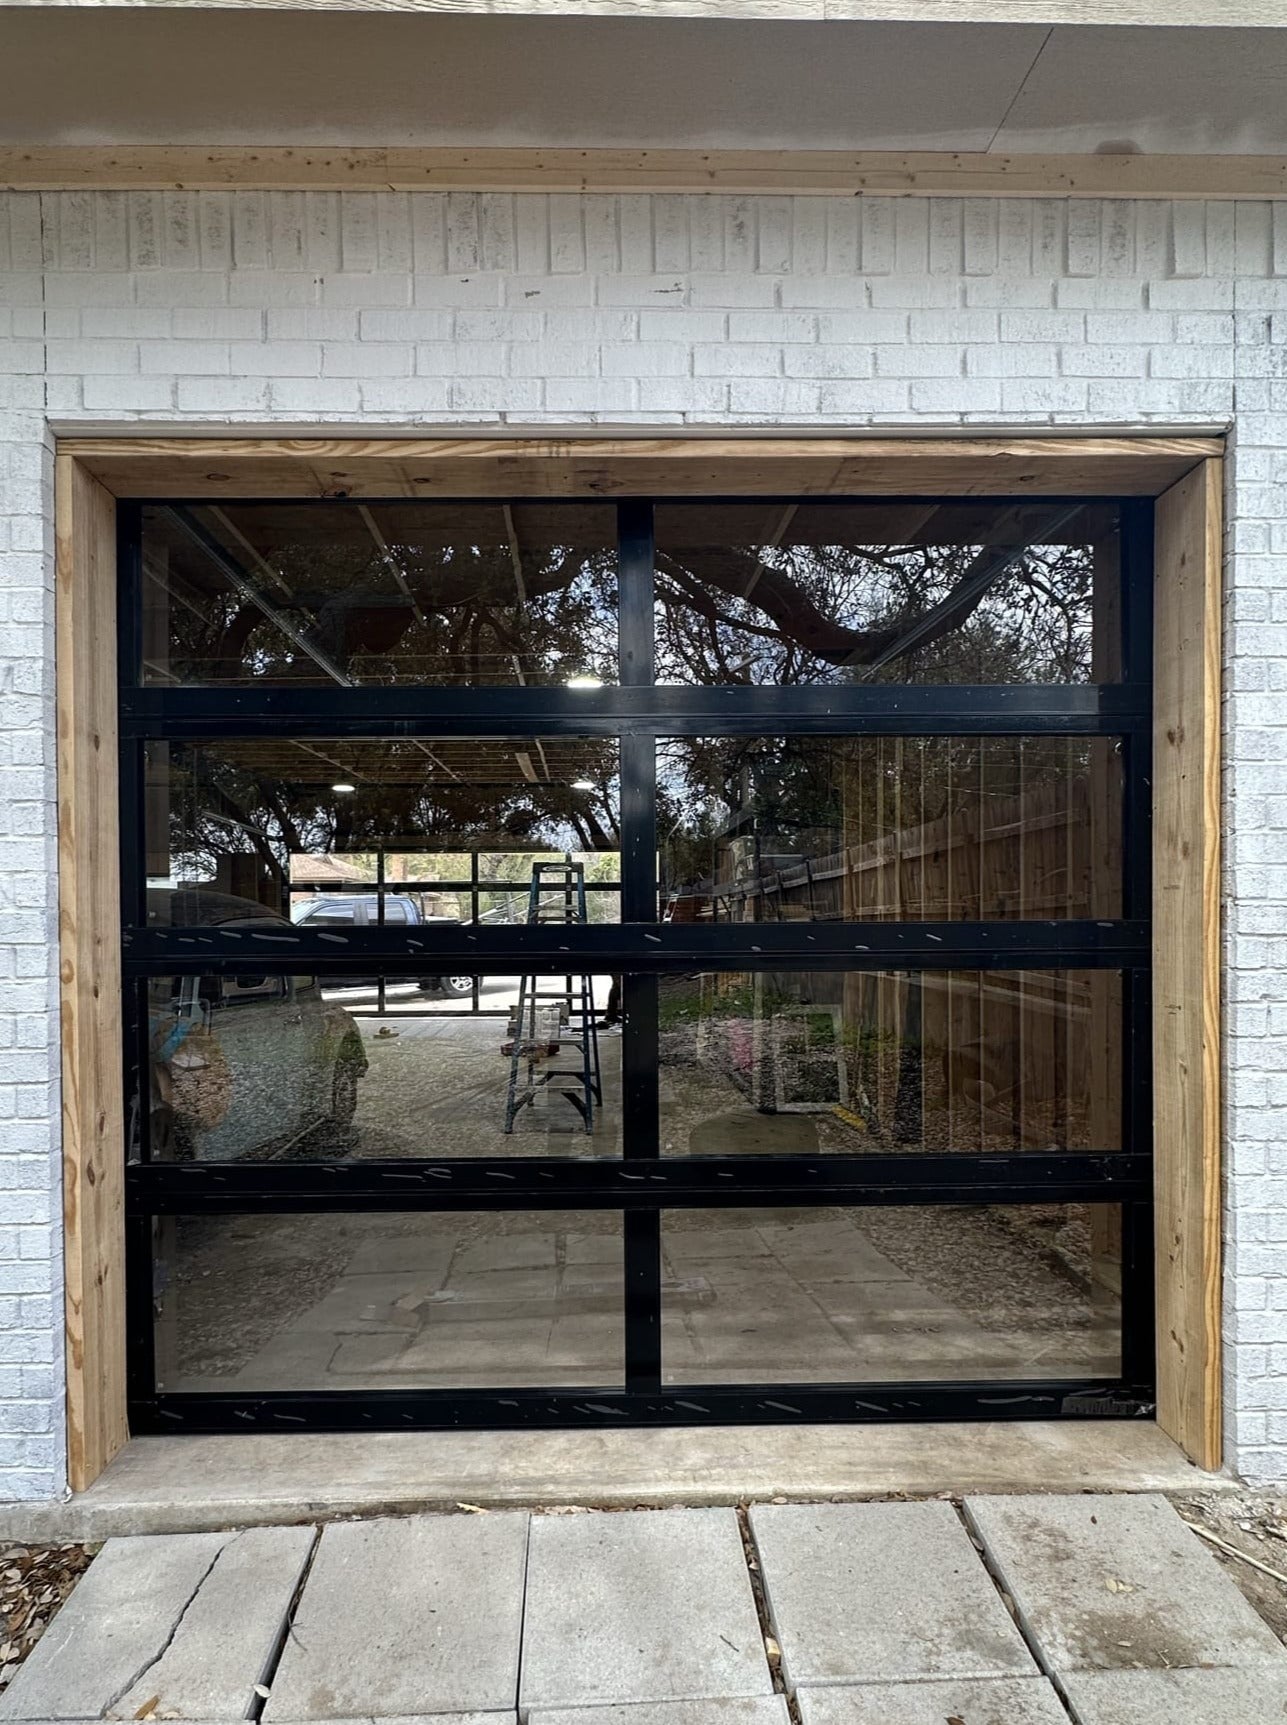 8 FT Wide By 8 FT Tall Full View Garage Door Matt Black Finish With Clear Glass